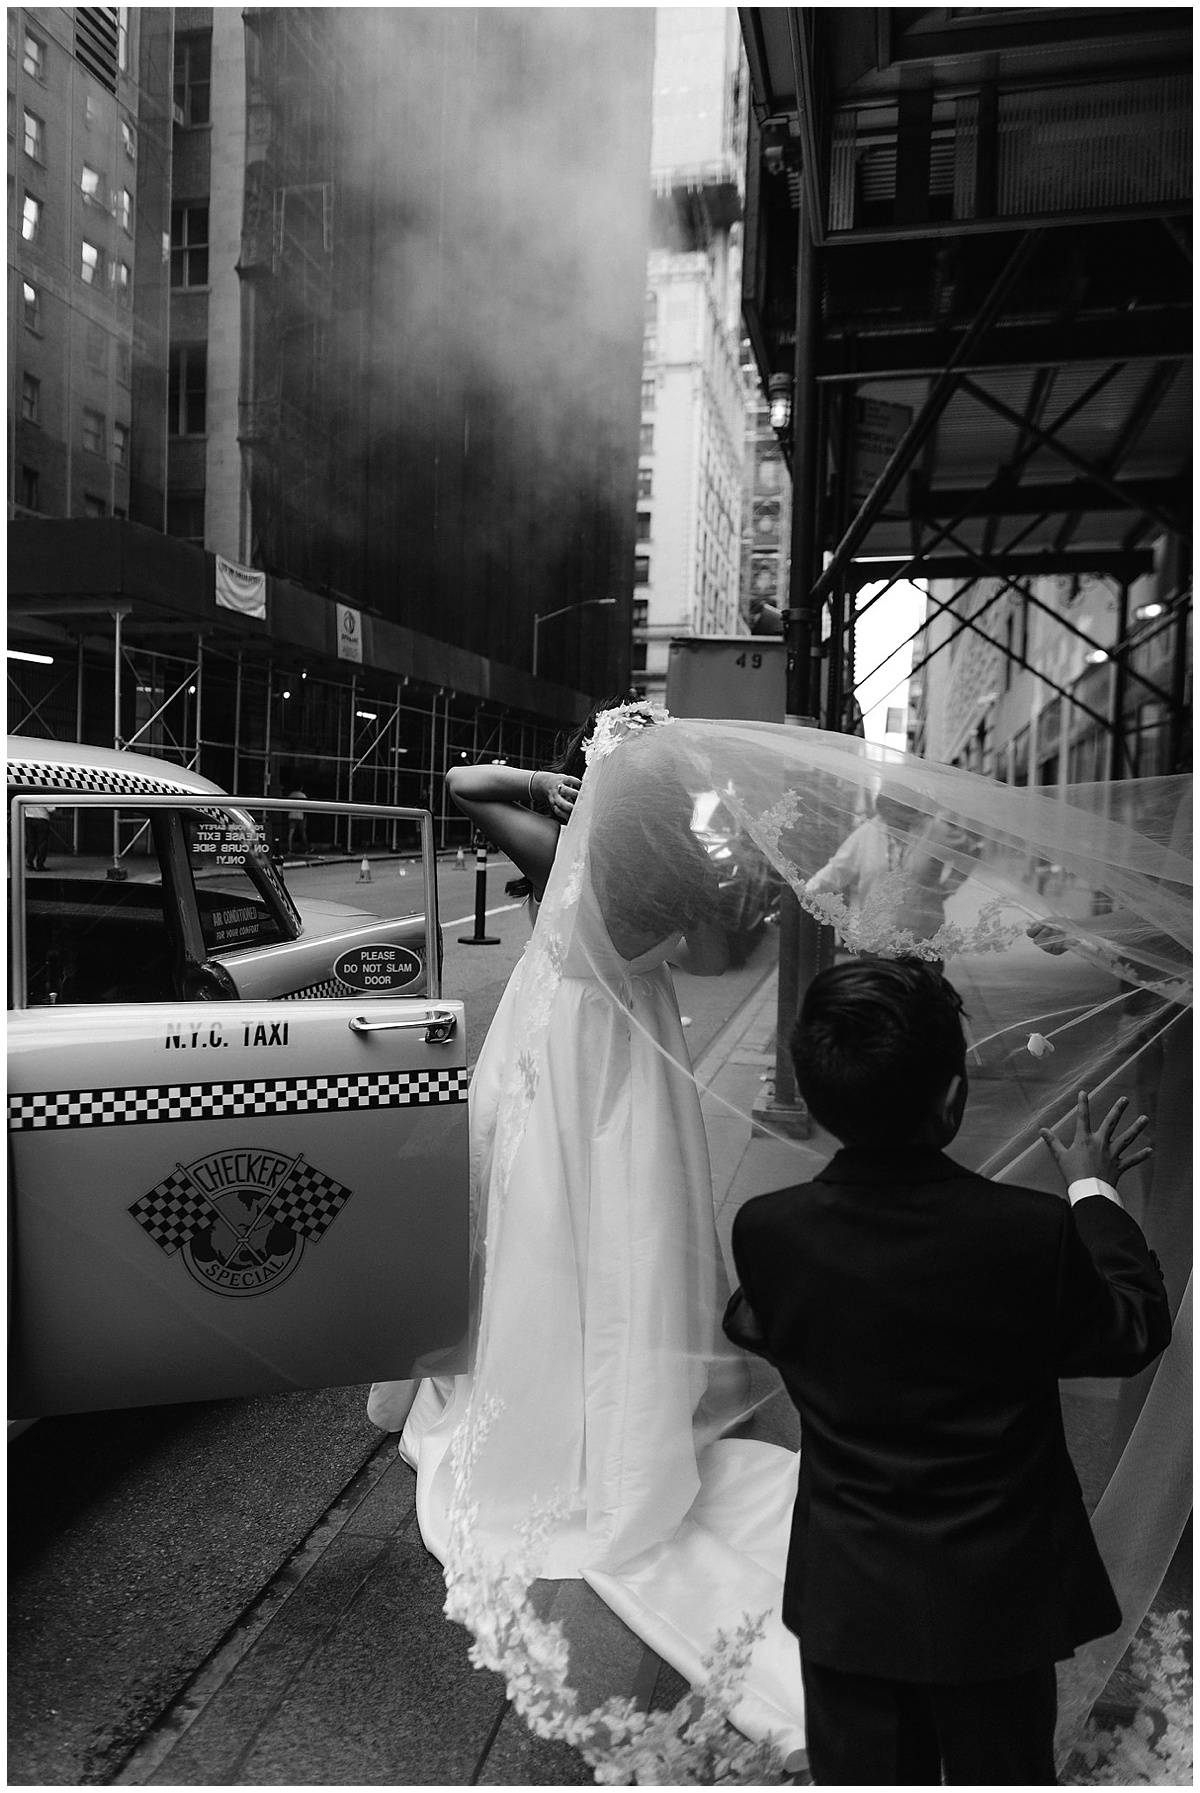 A bride gets into a yellow cab in New York as her veil blows in the wind and her ring bearer tries to catch it